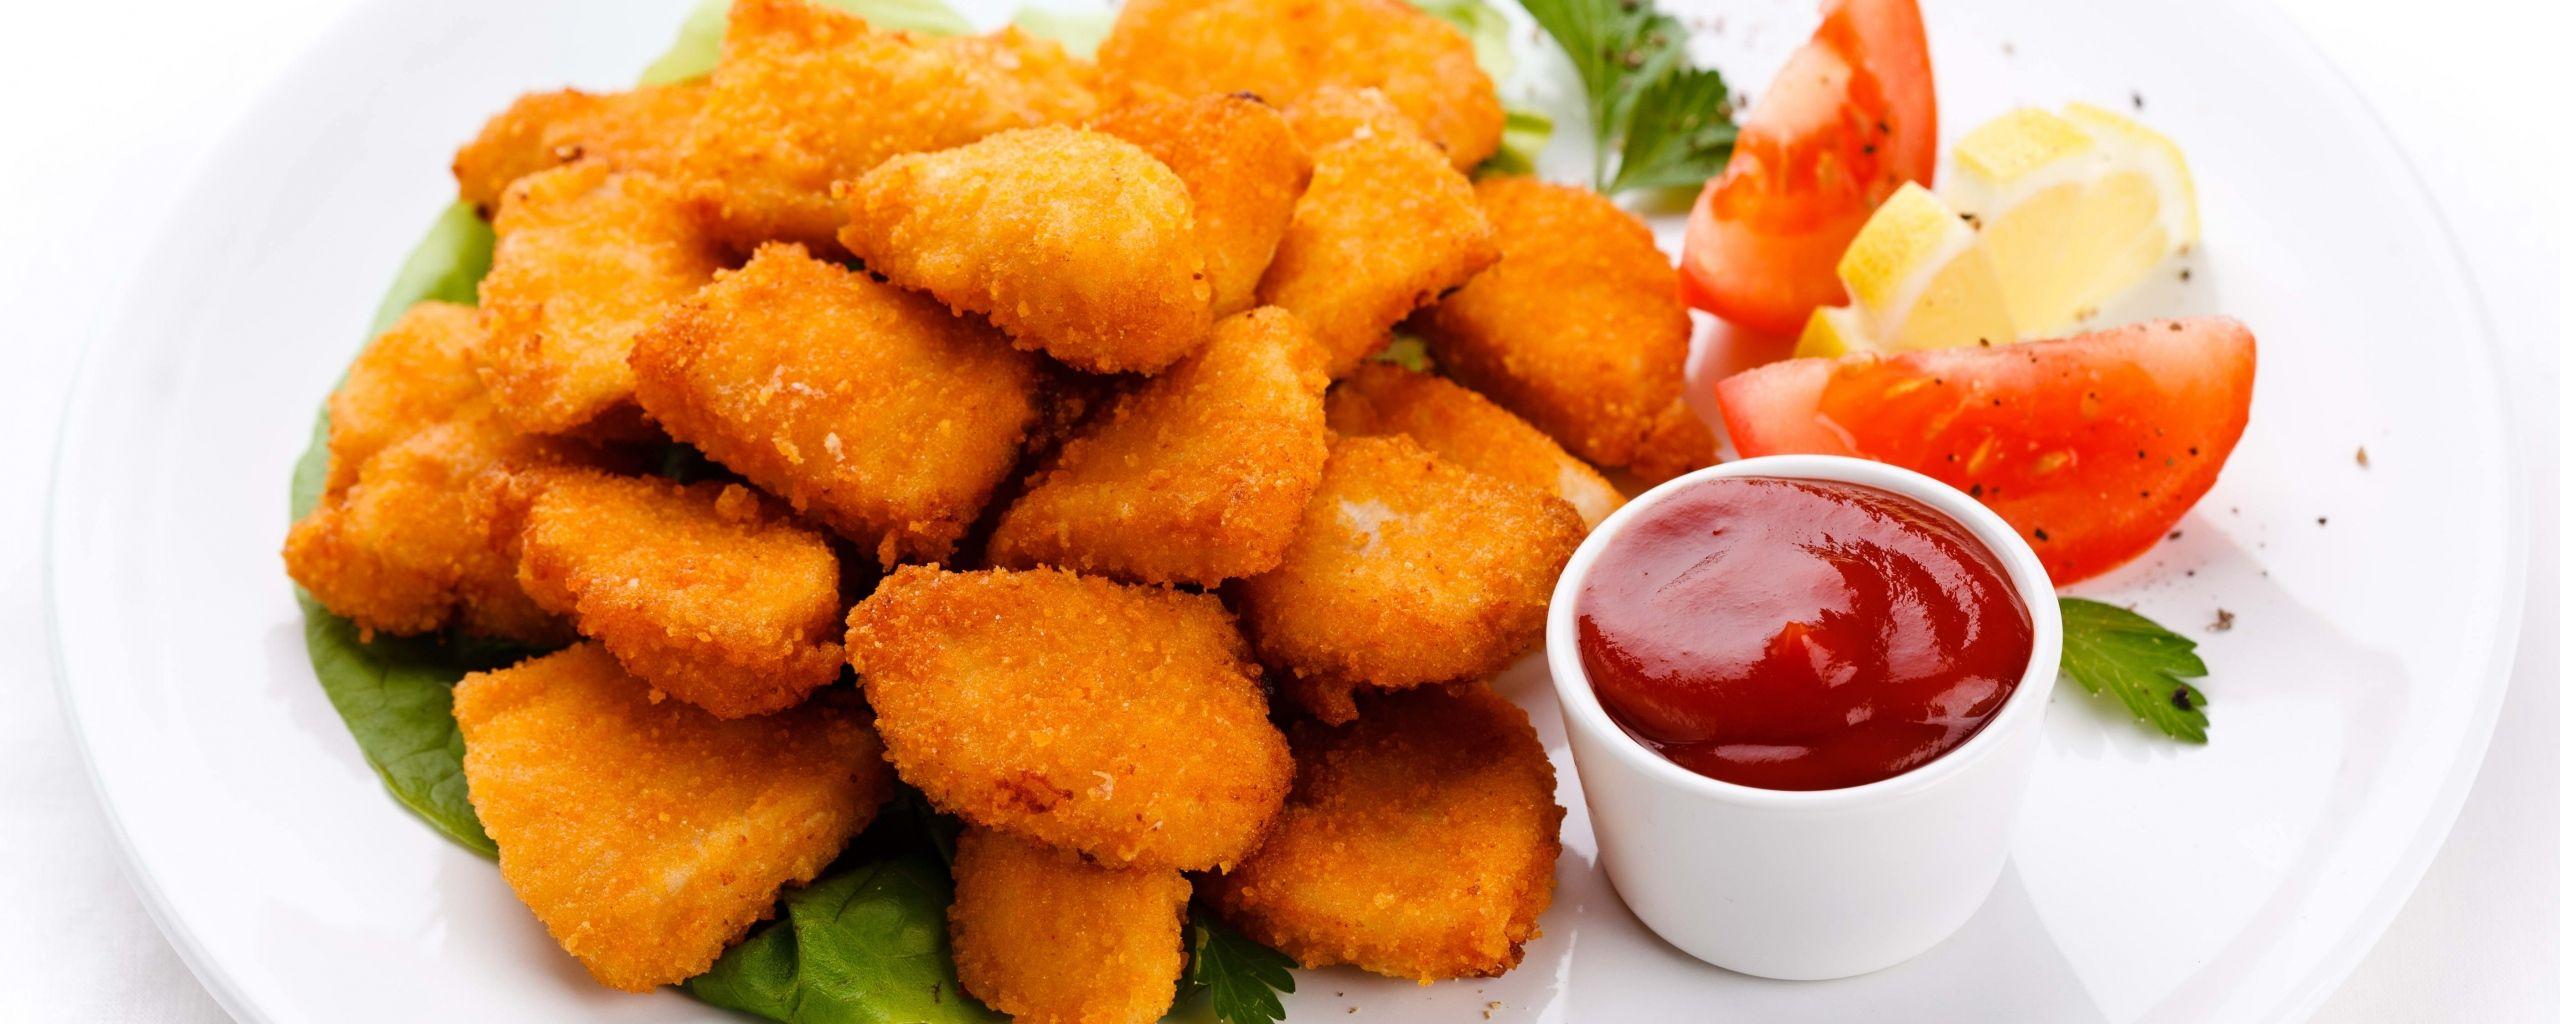 Wallpaper  meat fish fast food lettuce French fries potatoes meal  cuisine dish produce vegetarian food hors d oeuvre asian food fried  food chicken fingers chicken nugget 5522x3744  wallpaperUp  616200  HD  Wallpapers  WallHere